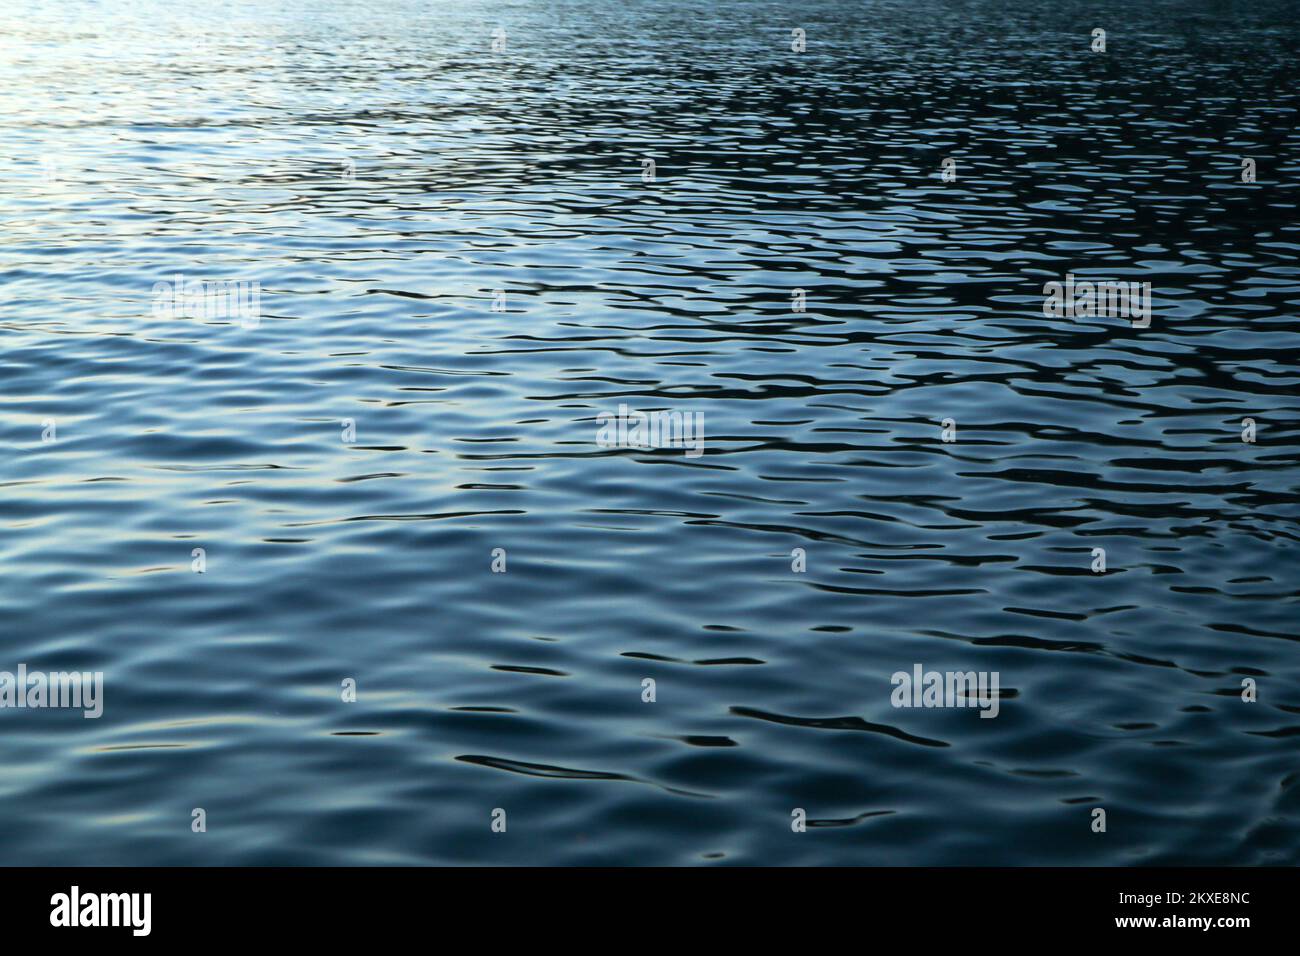 The detail of the calm surface of the sea with the small waves during the evening while sun went already down and the blue shades came. Stock Photo